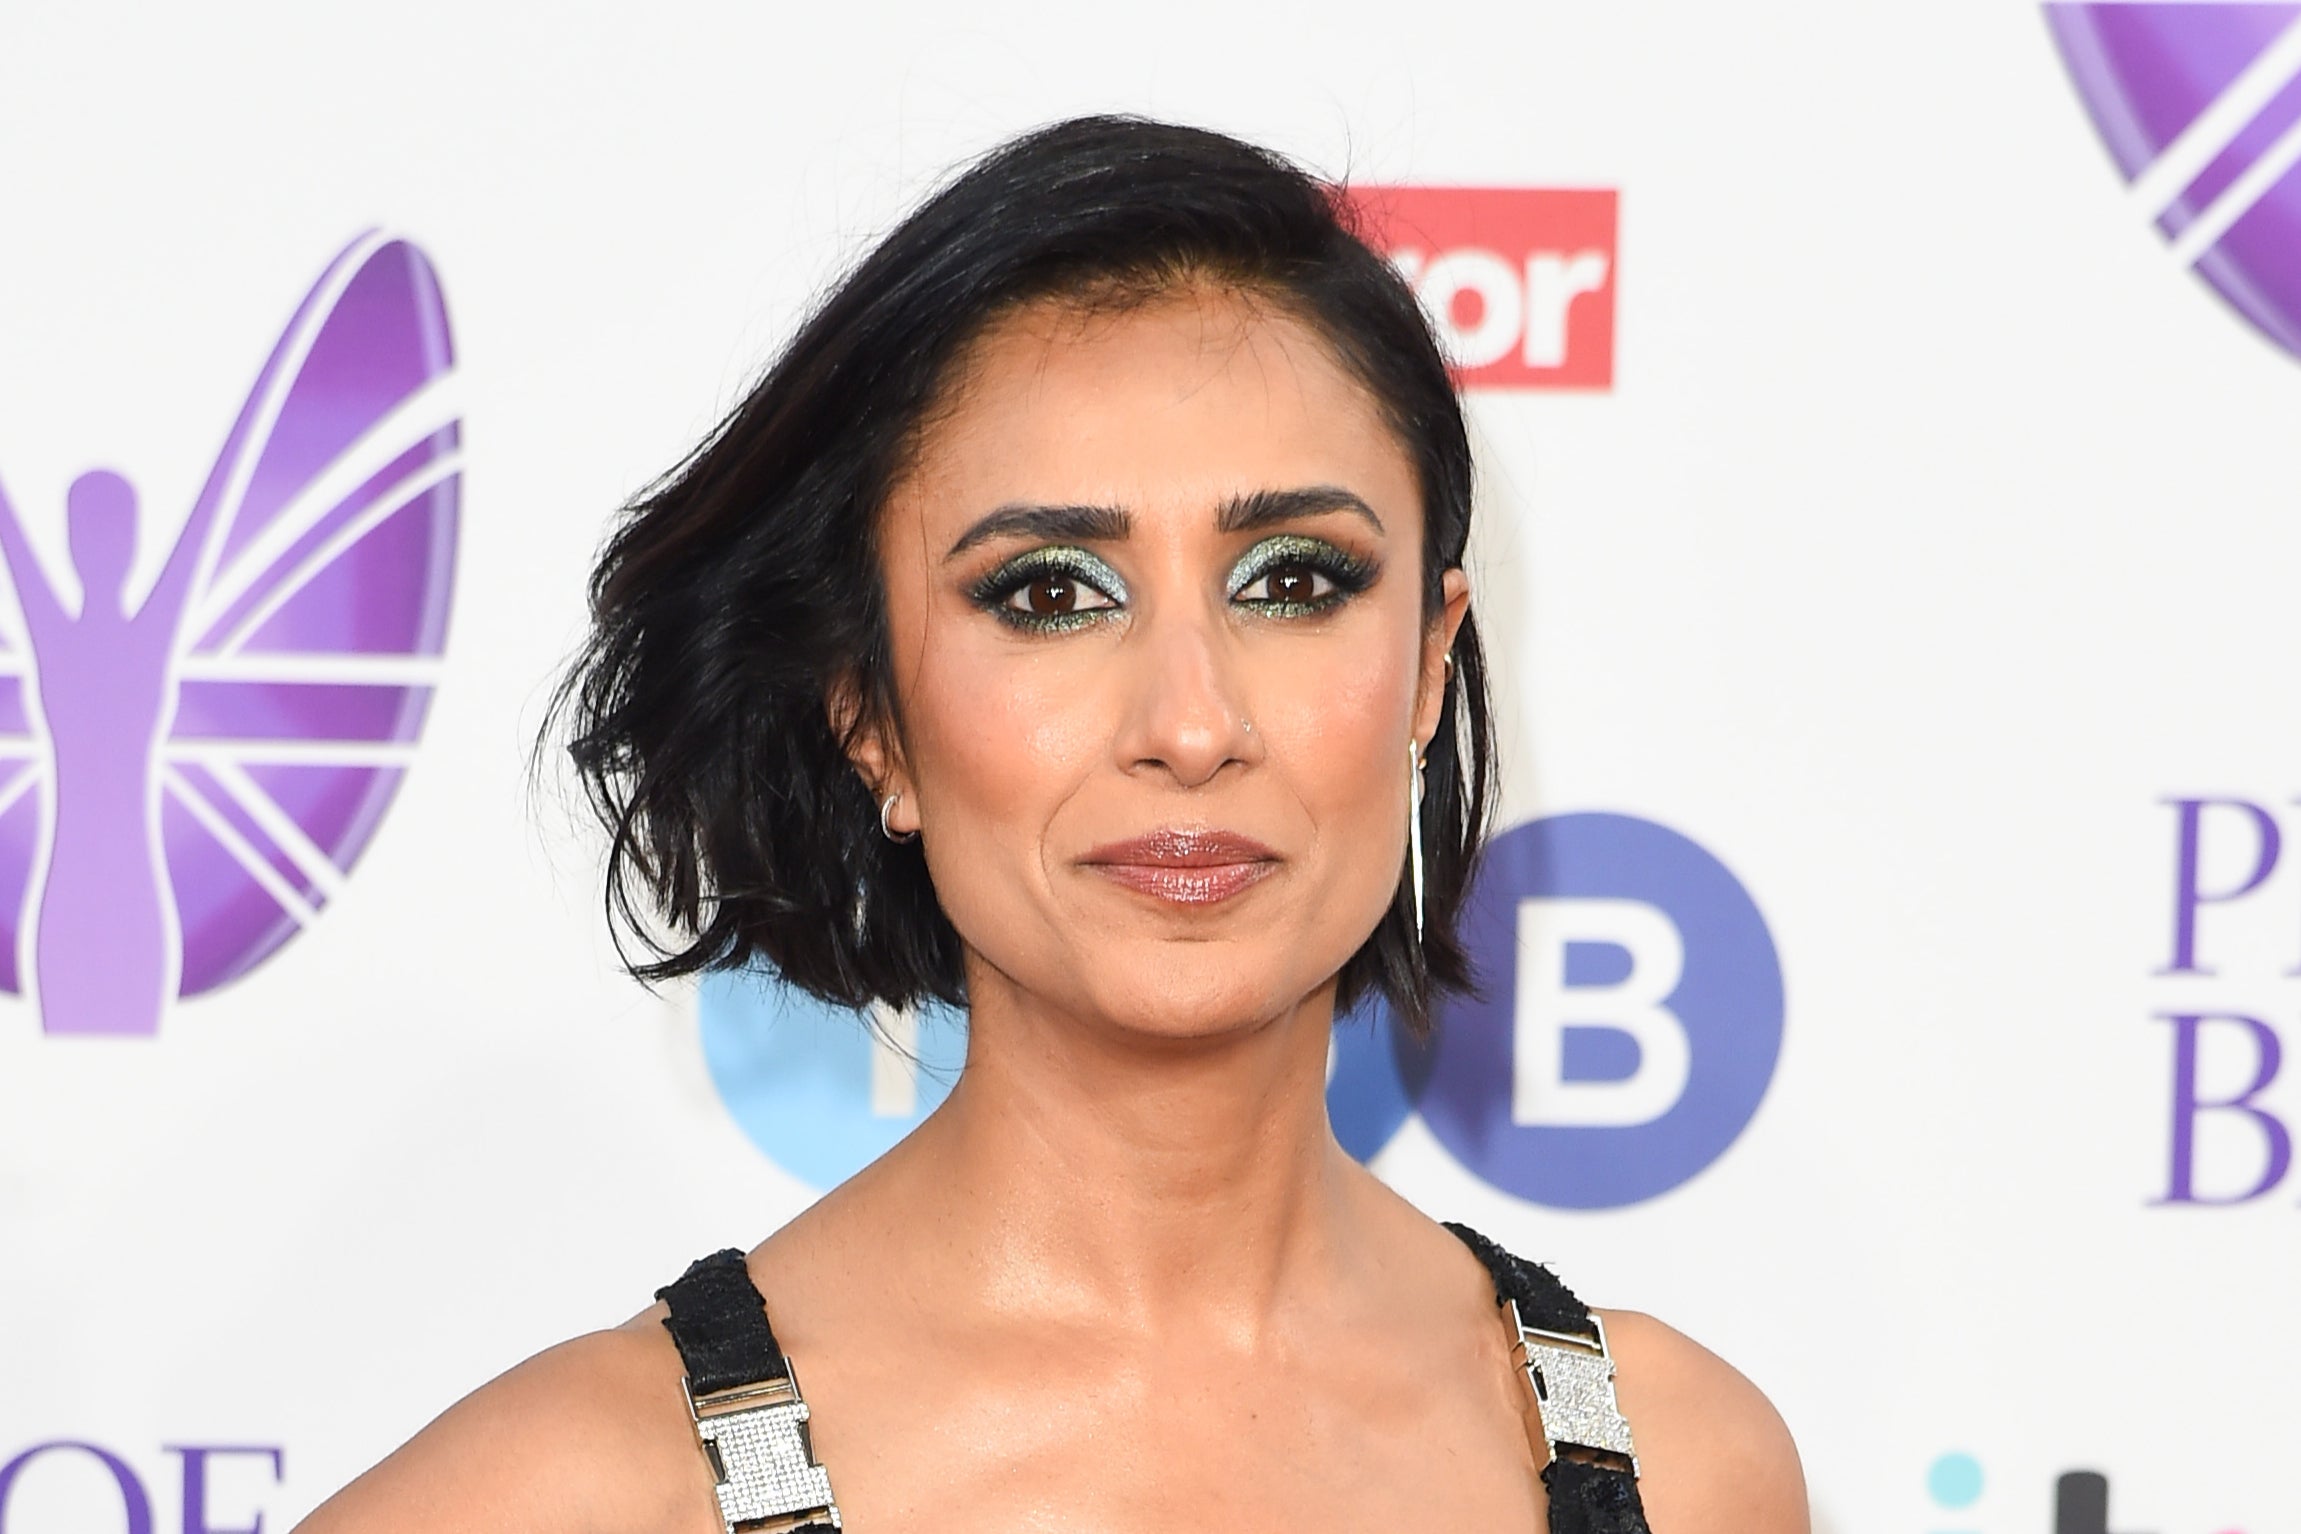 Rani has been hosting ‘Woman’s Hour’ since 2021 alongside her role on ‘Countryfile’